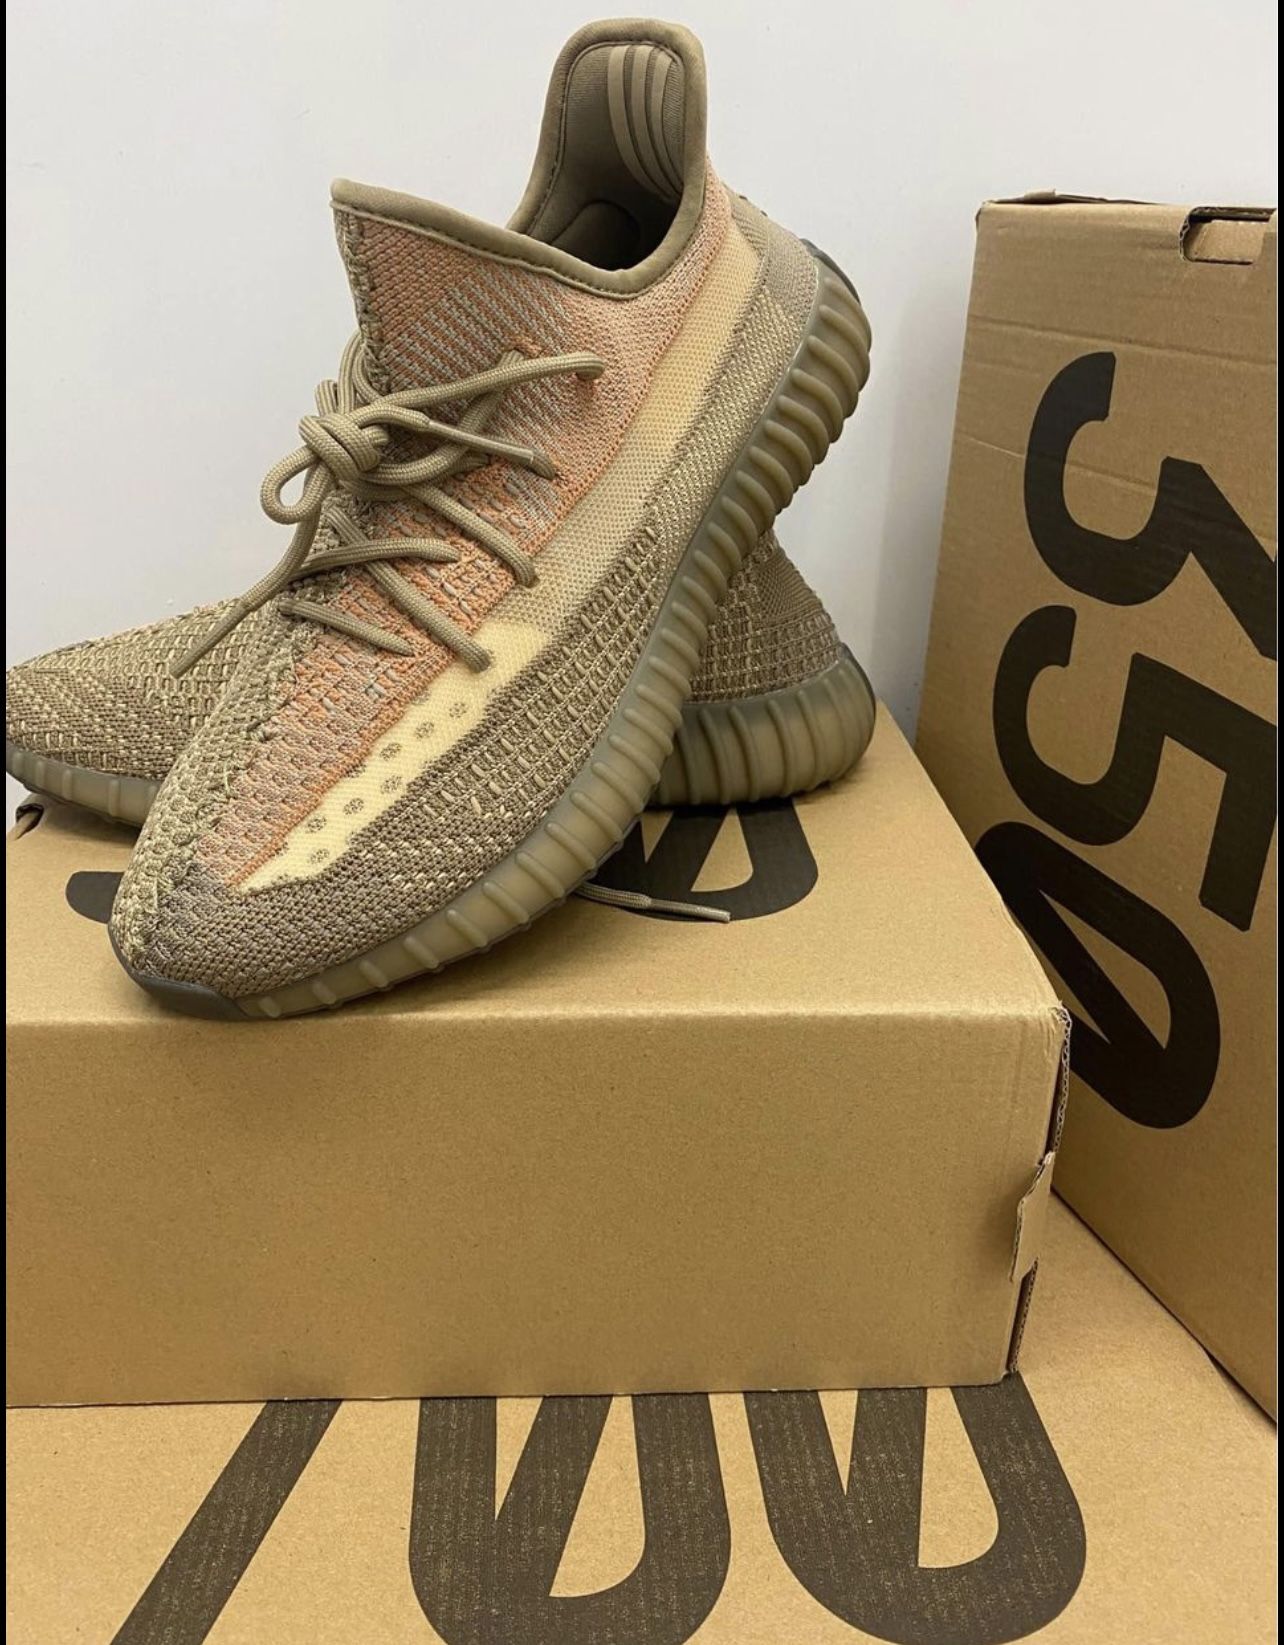 Yeezy 350 Sand Taupe All Sizes In Description 